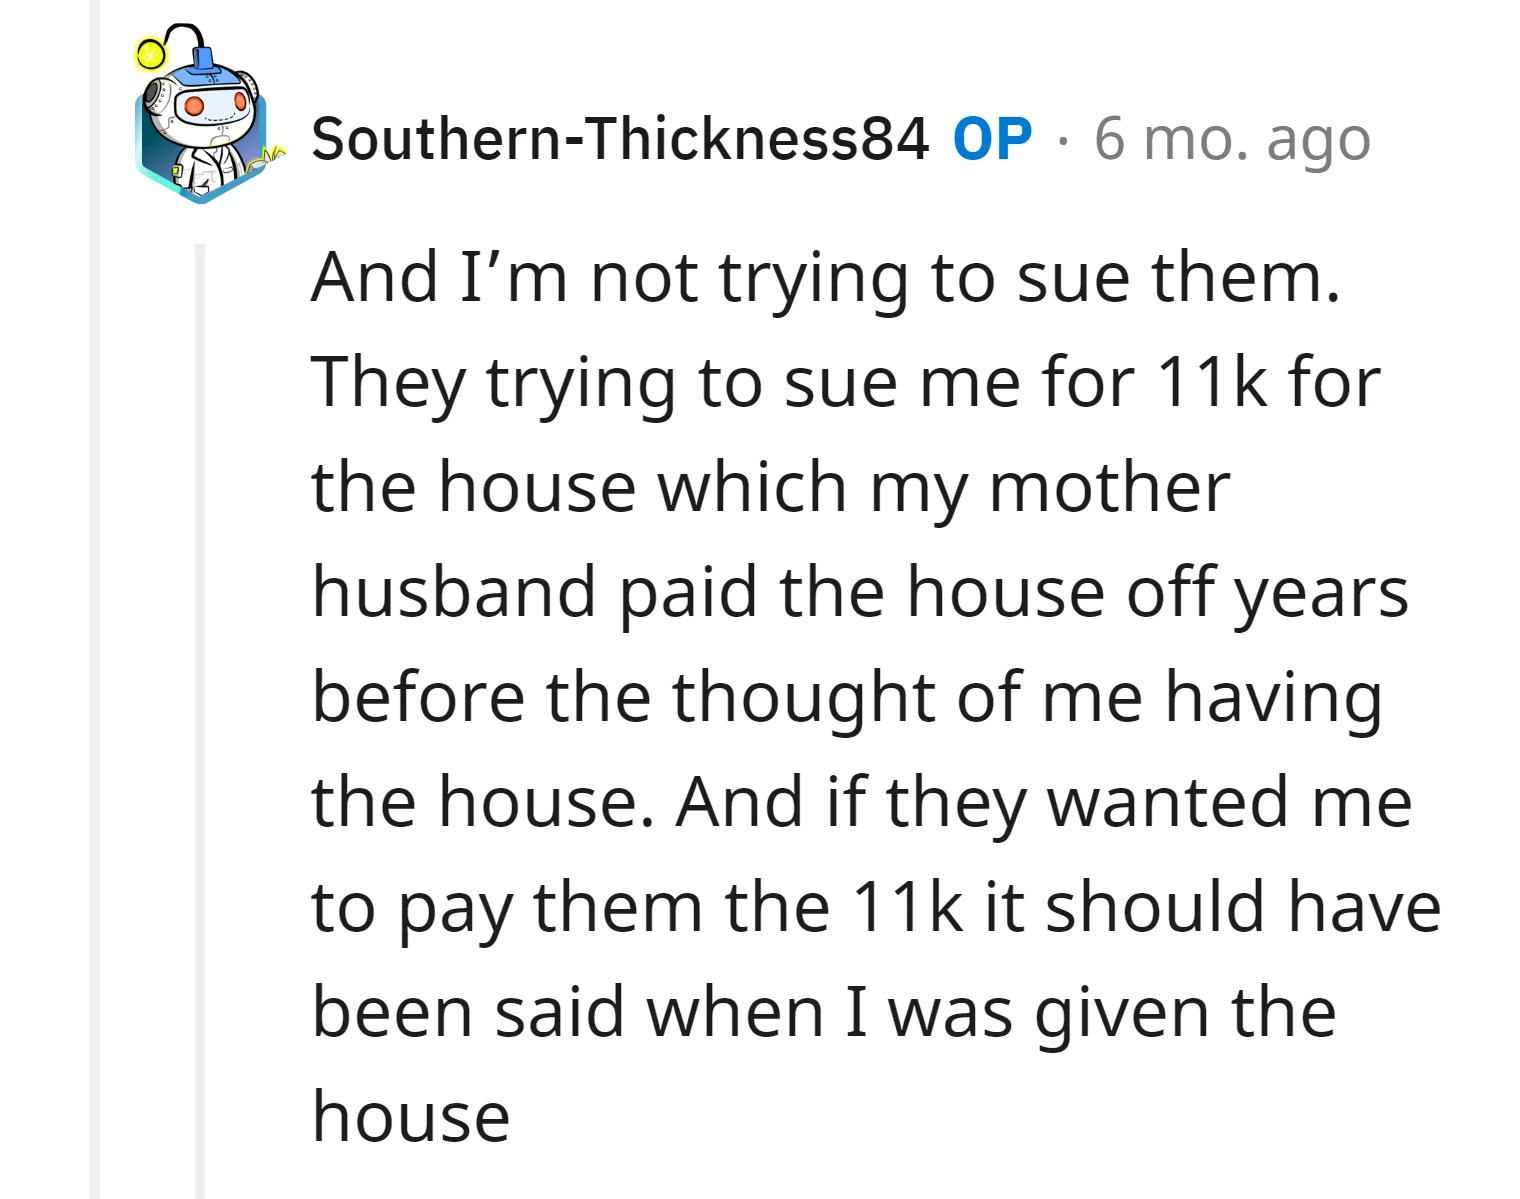 They're not attempting to sue their family; instead, their family is trying to sue them for $11k